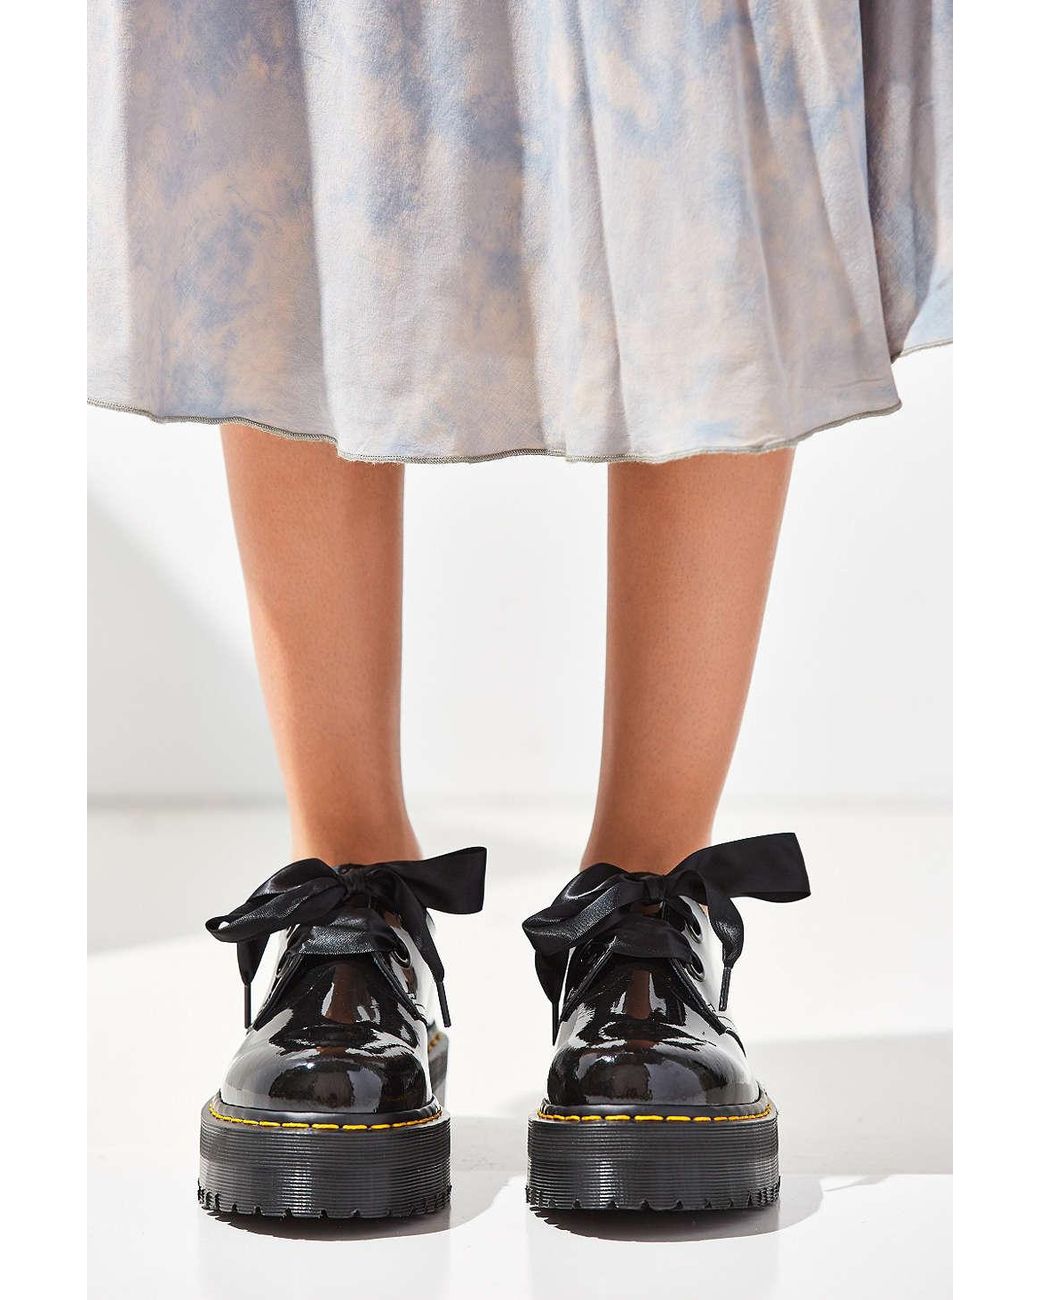 Dr. Martens Holly Patent Leather Platform Oxford in Black | Lyst